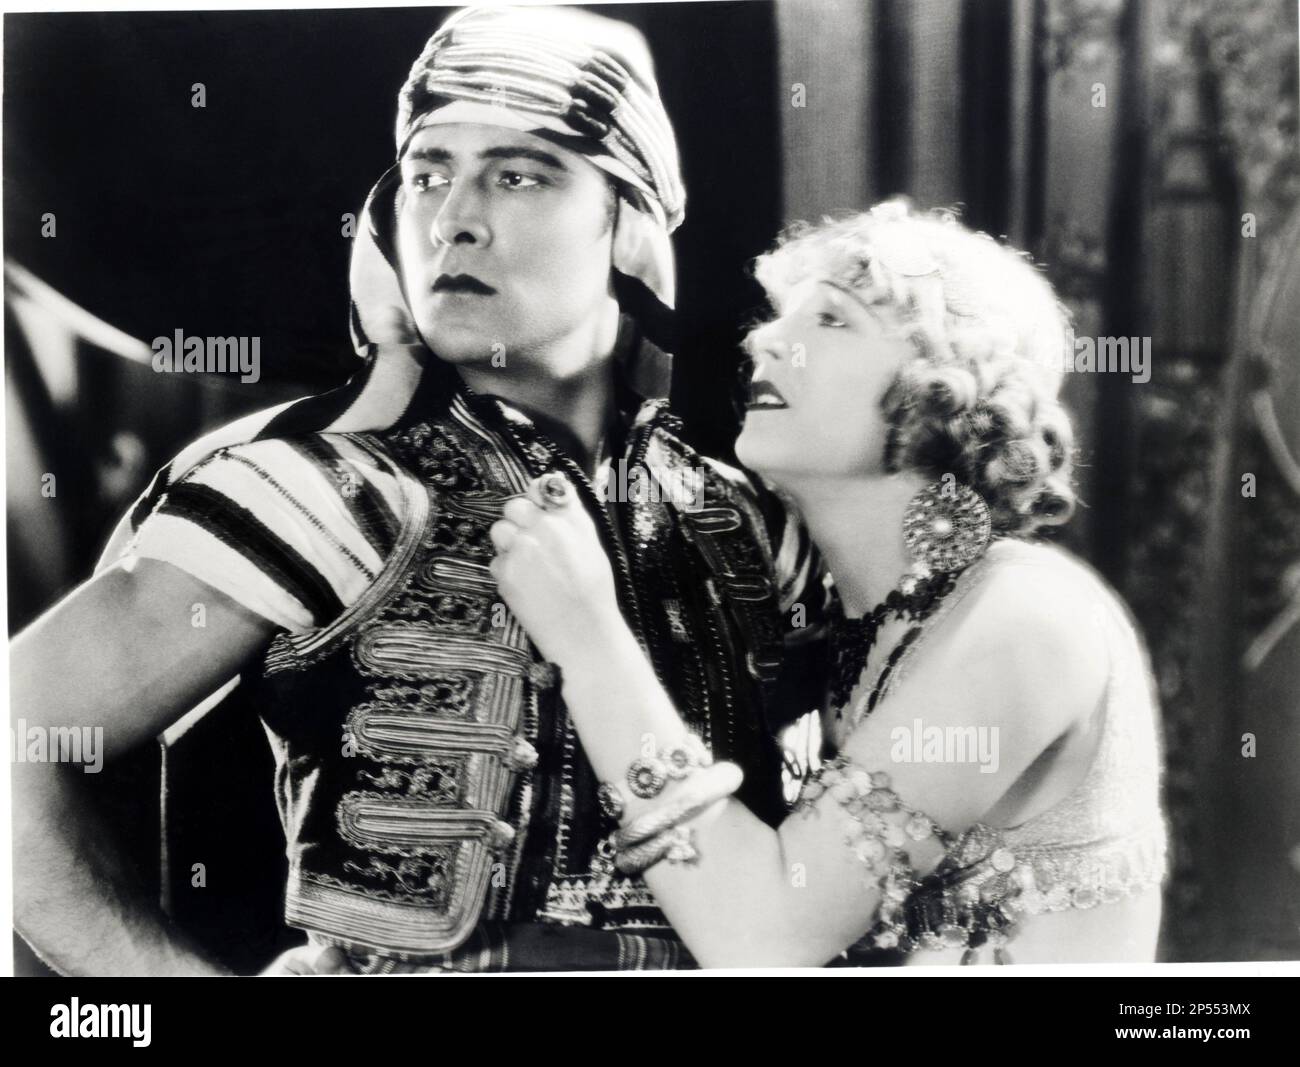 171 Rudolph Valentino Stock Video Footage - 4K and HD Video Clips |  Shutterstock